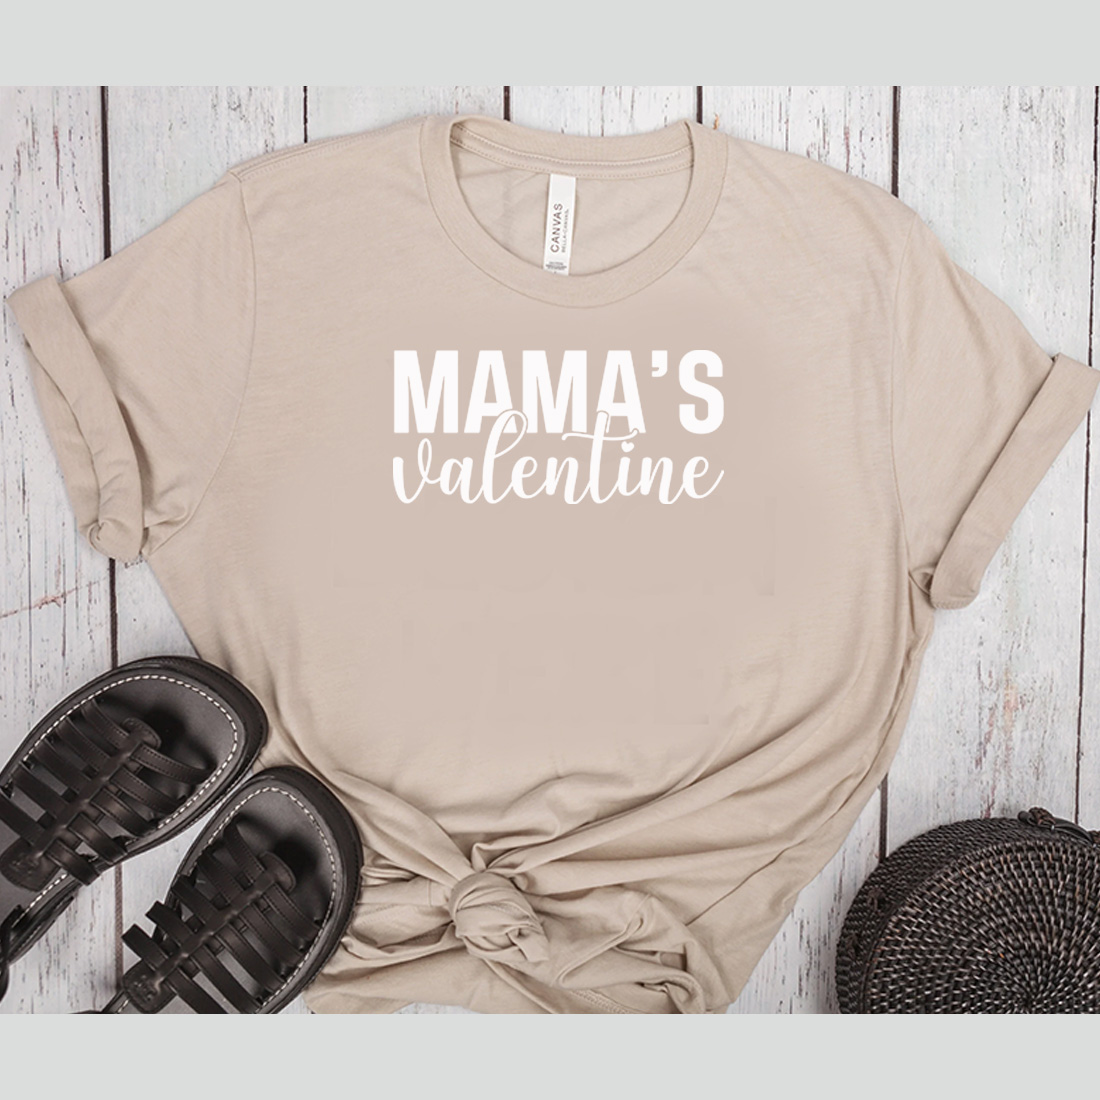 Image of a T-shirt with a beautiful inscription Mamas Valentine